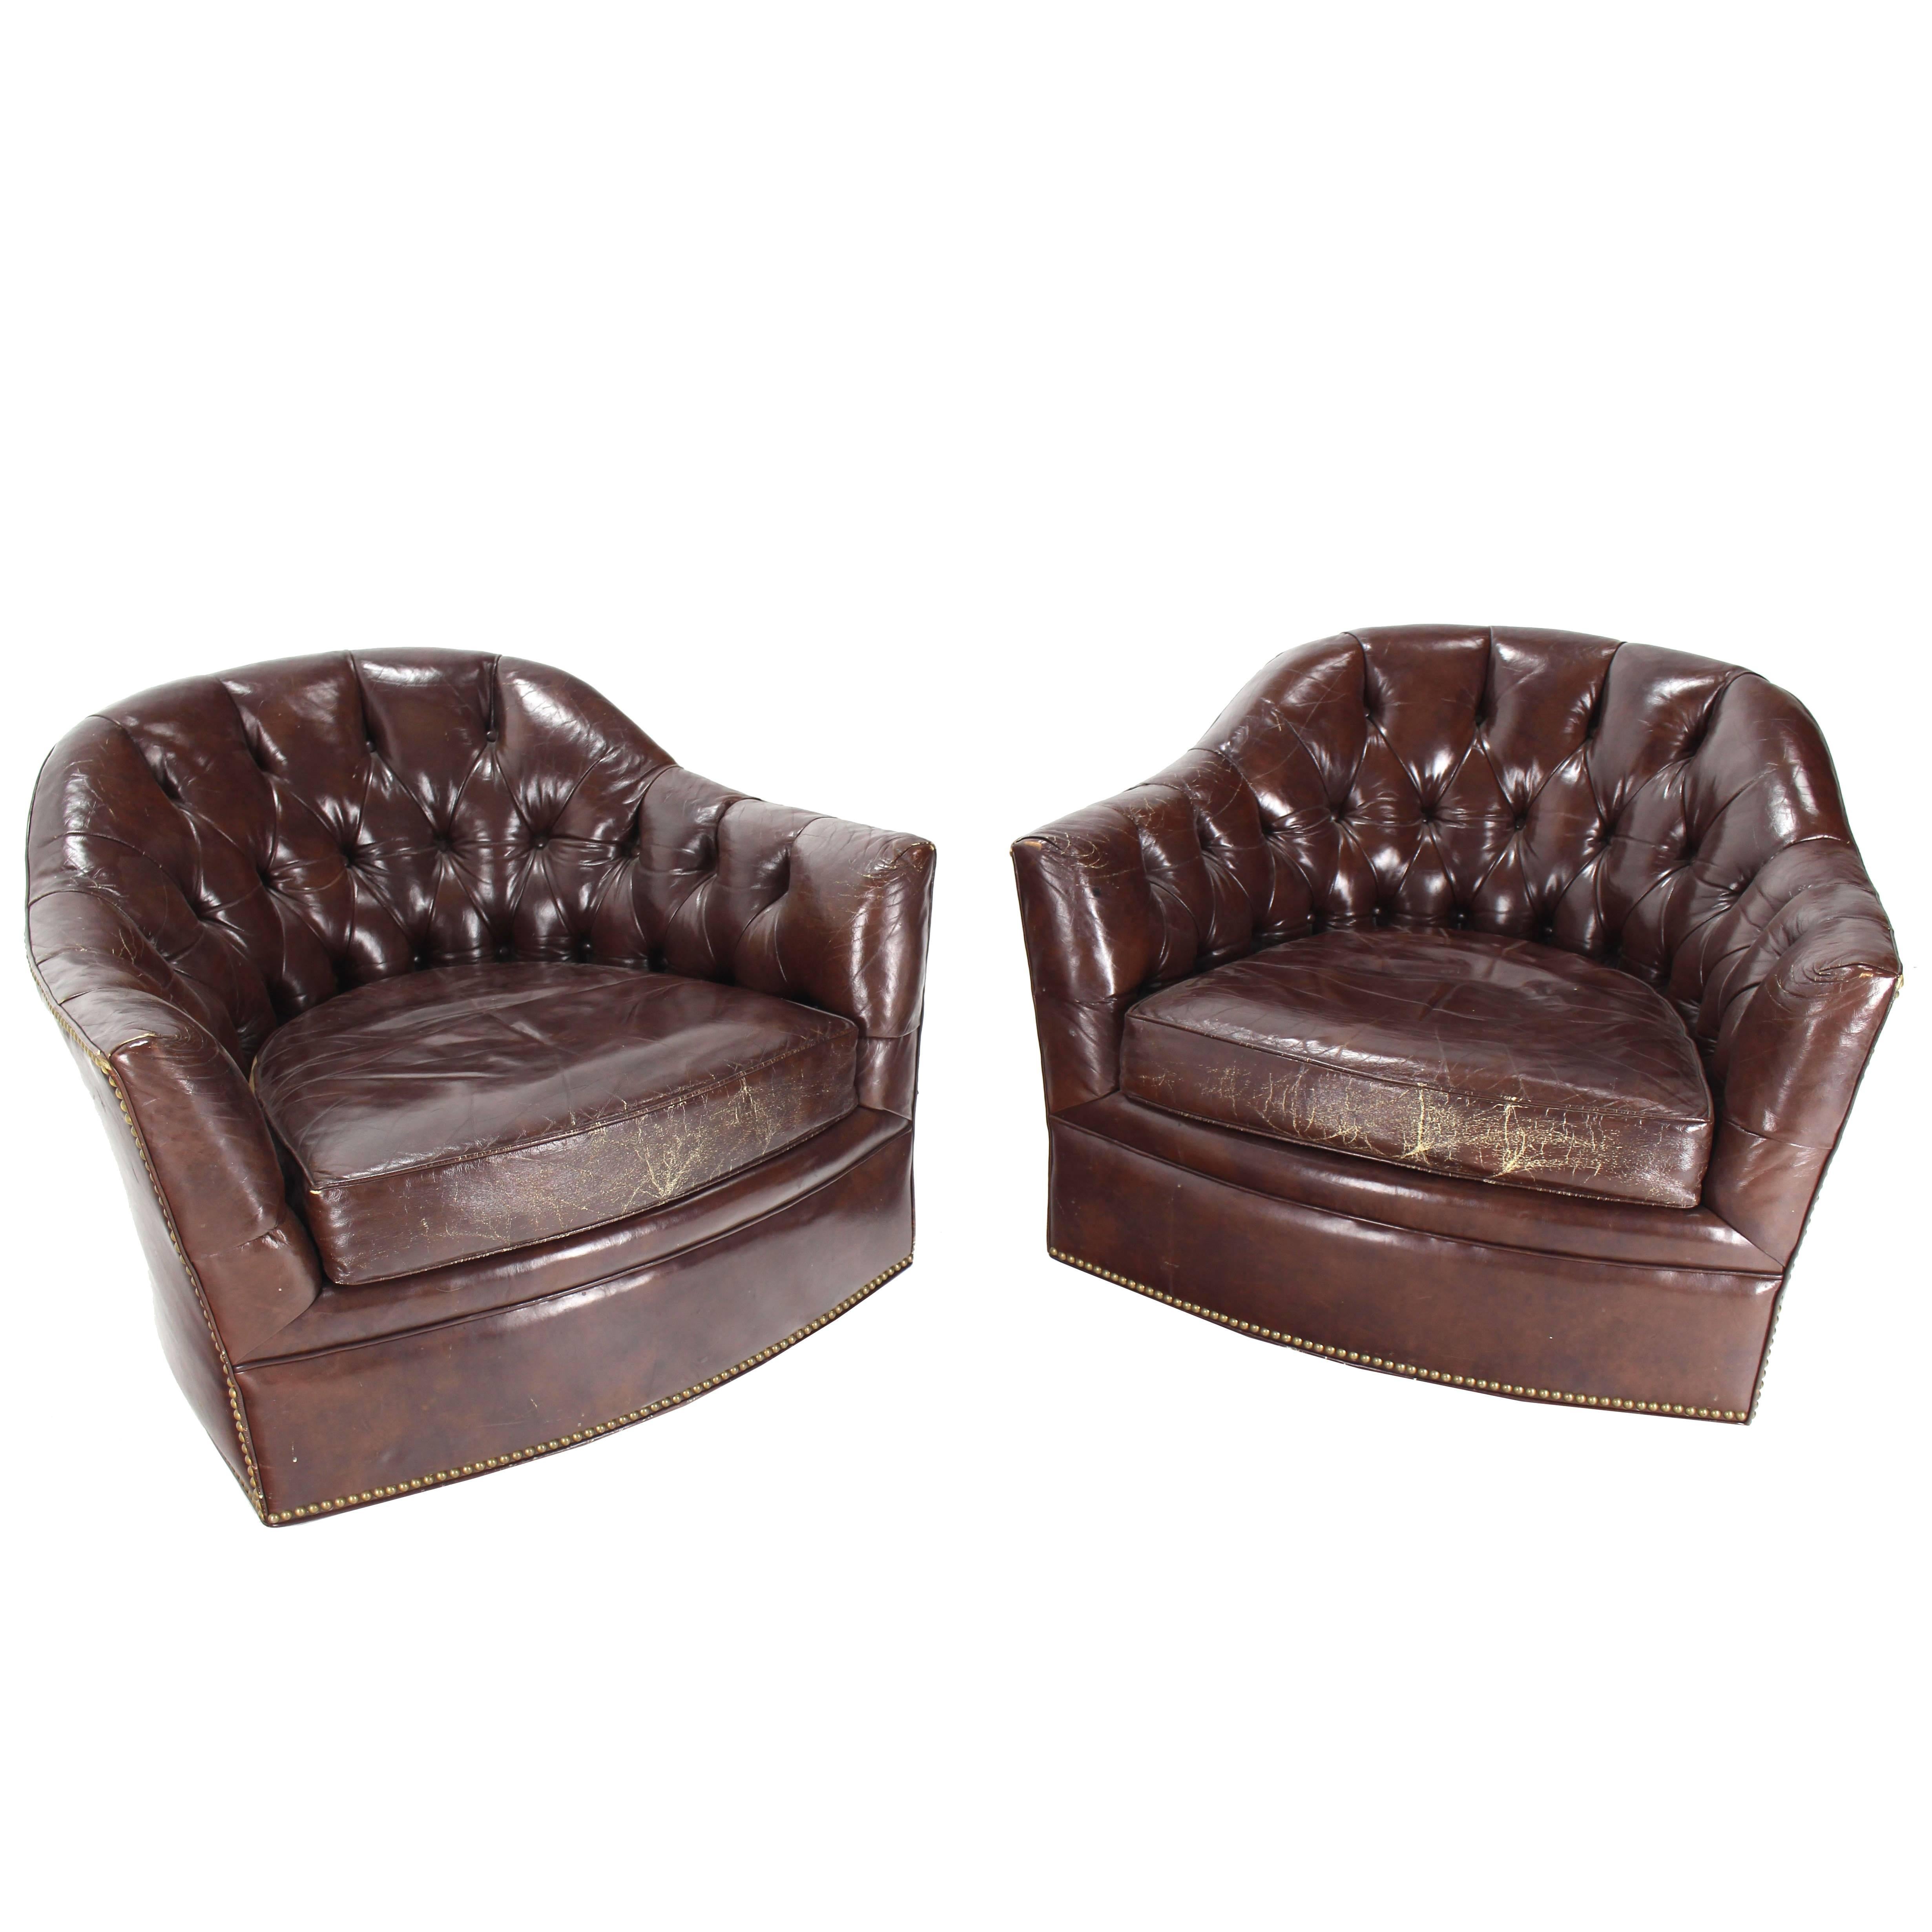 Pair of Brown Shiny Leather Swivel Chairs Tufted Chesterfield Backs Nice Wear